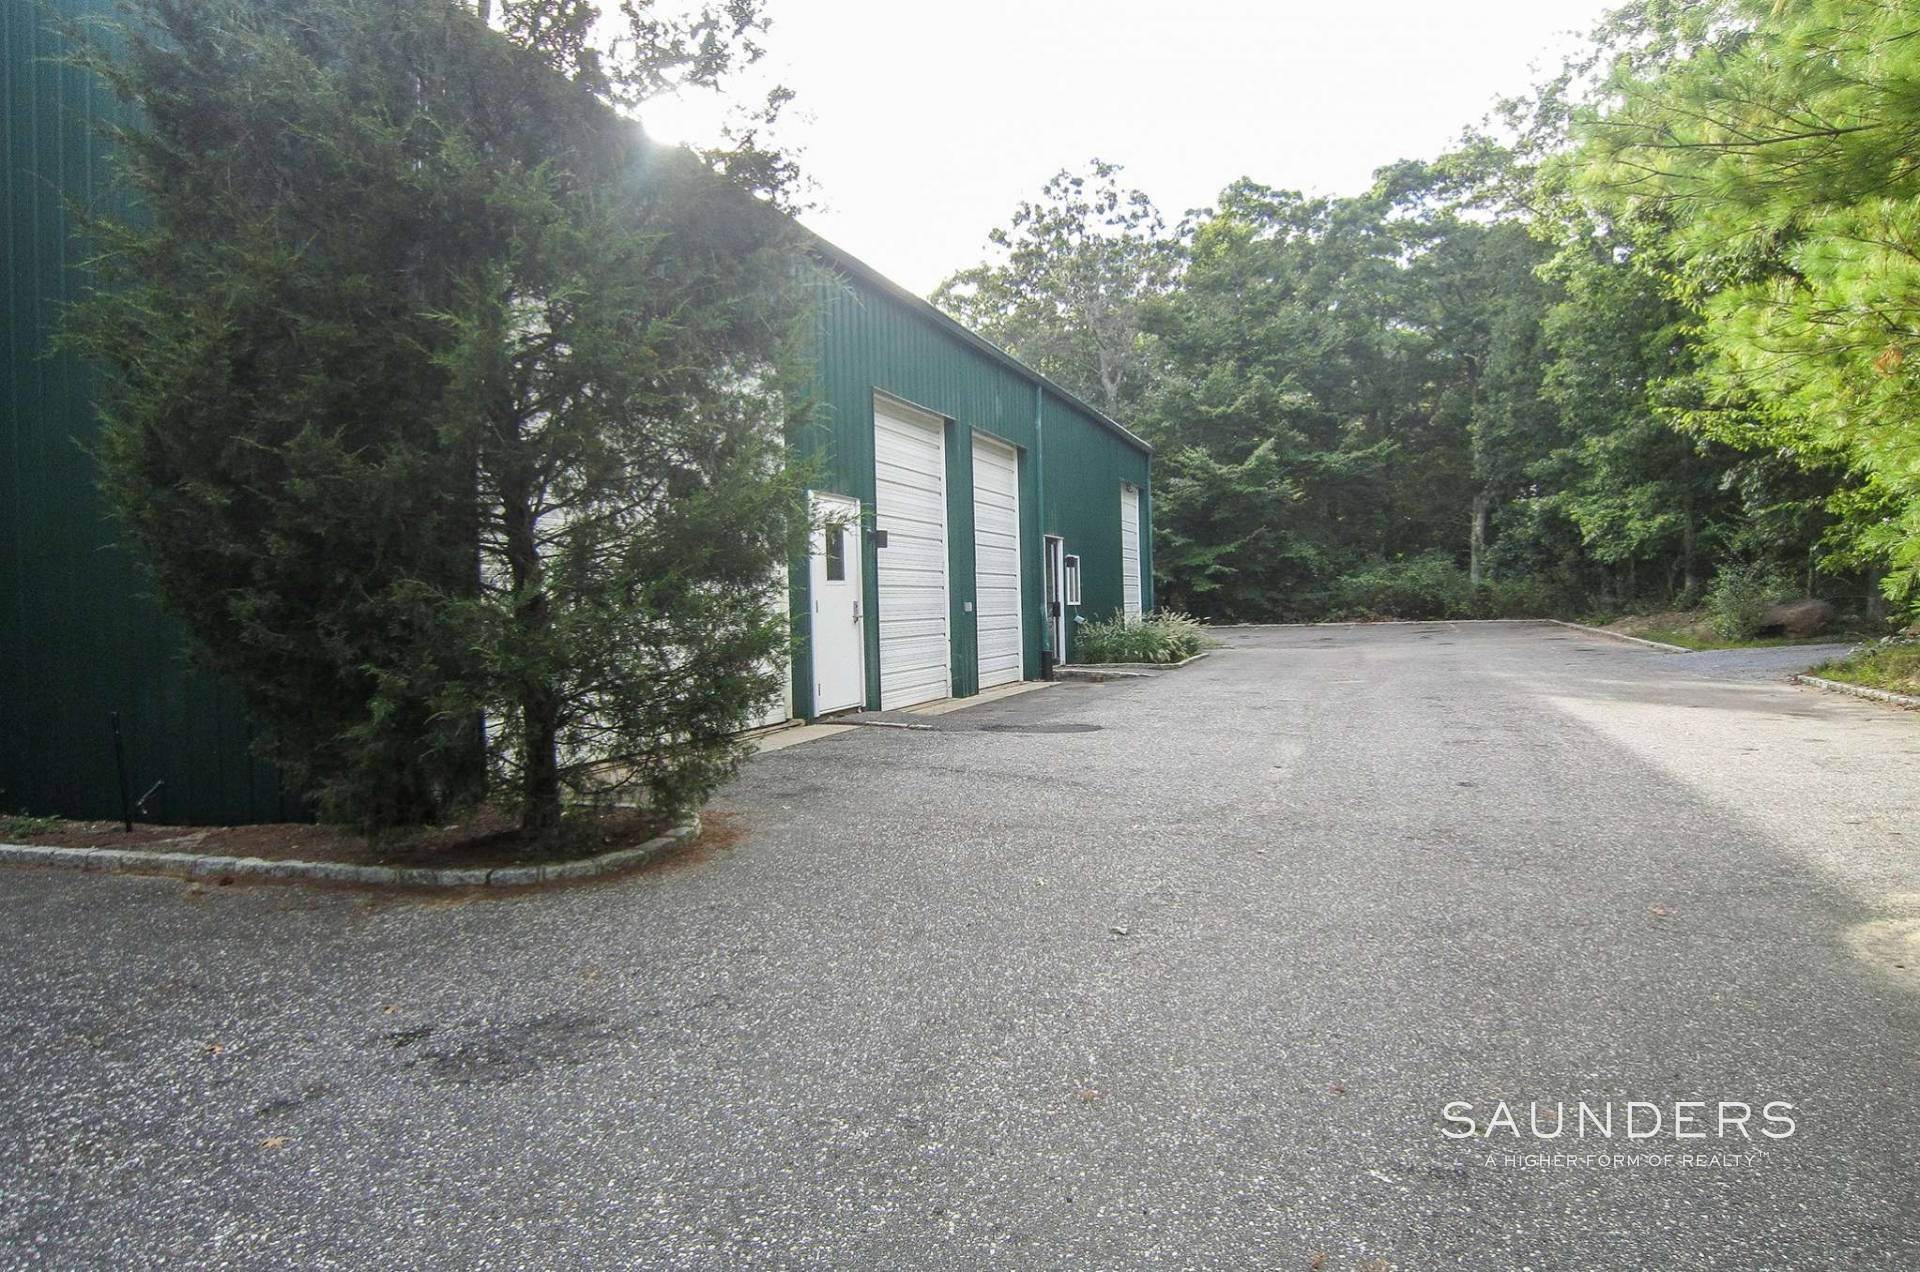 2. Commercial for Sale at East Hampton - Commercial/ Industrial Building For Sale 72 Harbor View Avenue, East Hampton, NY 11937